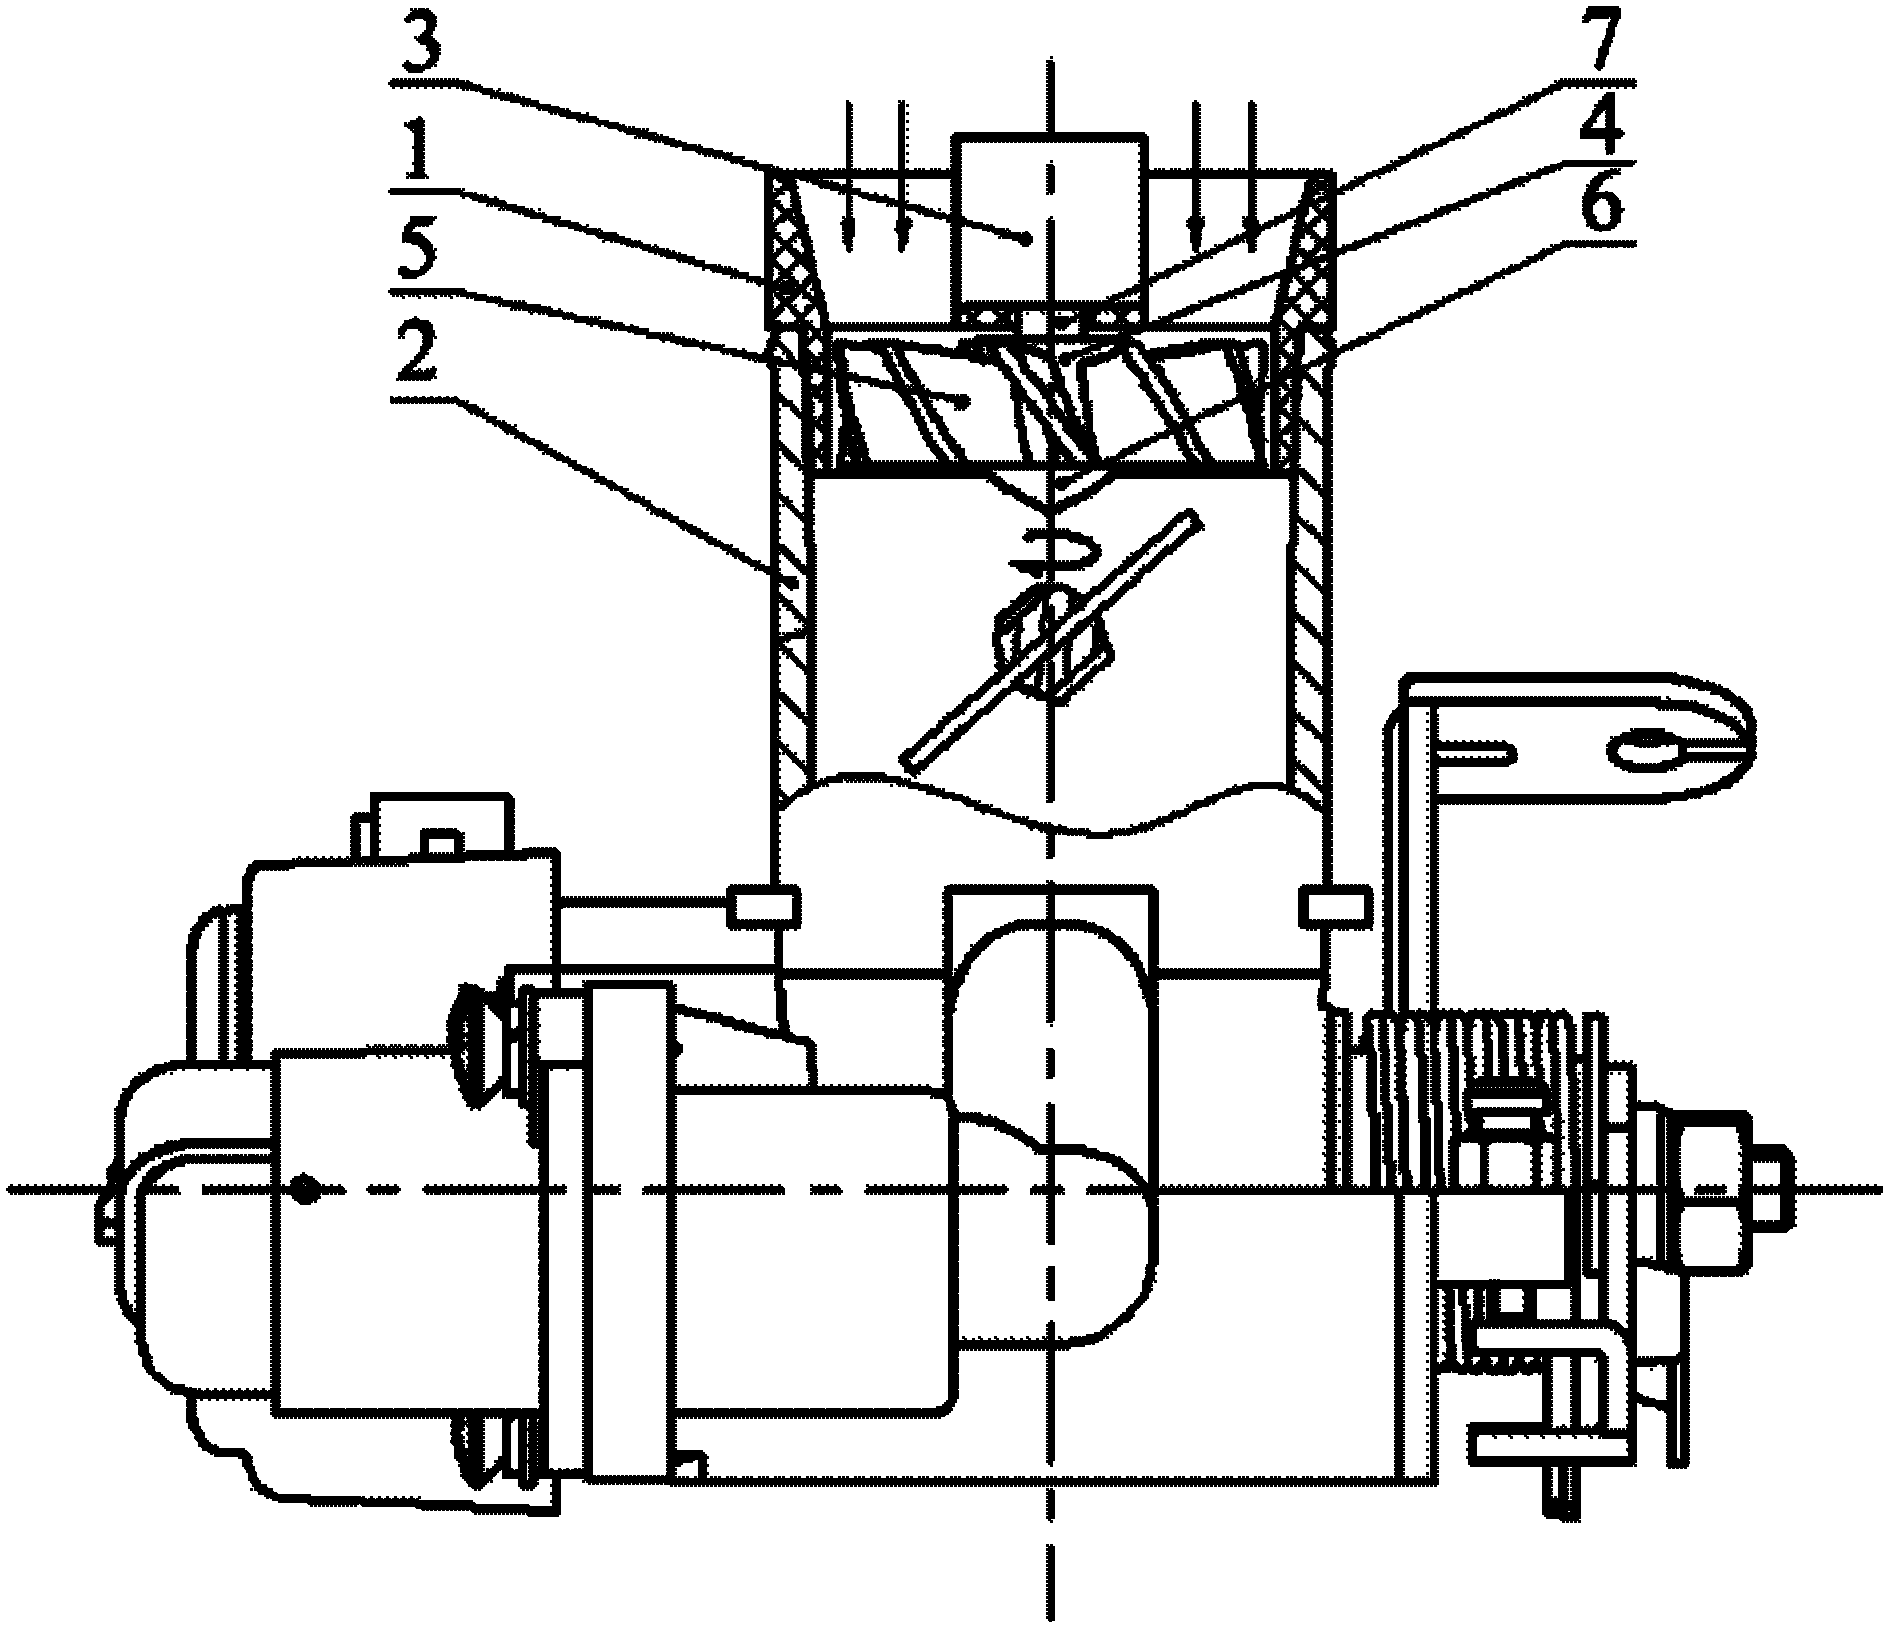 Engine and electric turbocharging system thereof